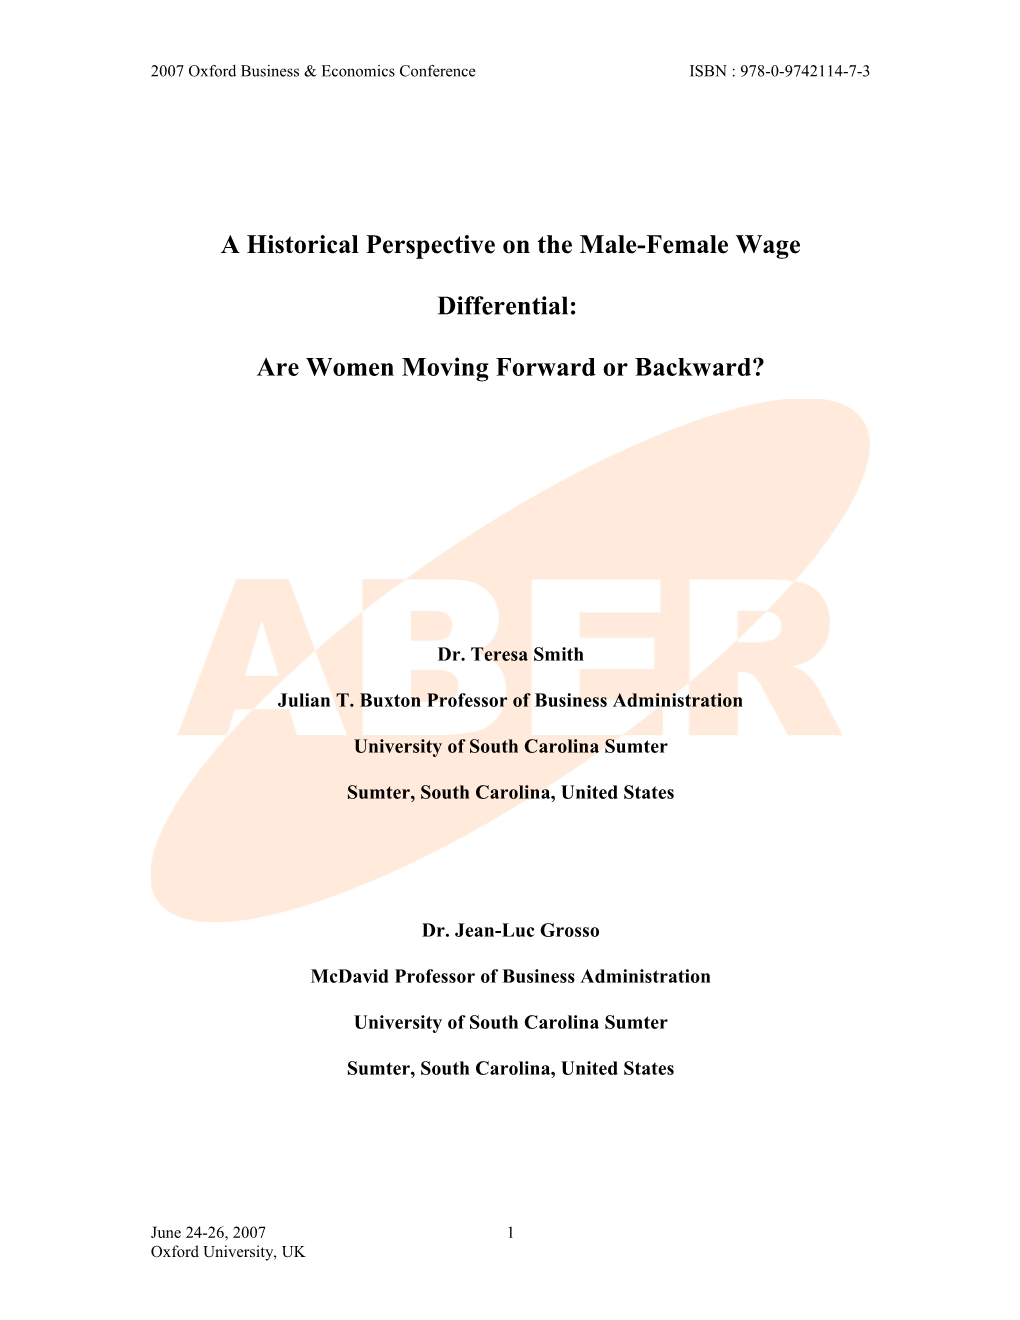 A Historical Perspective on the Male-Female Wage Differential: Are Women Moving Forward